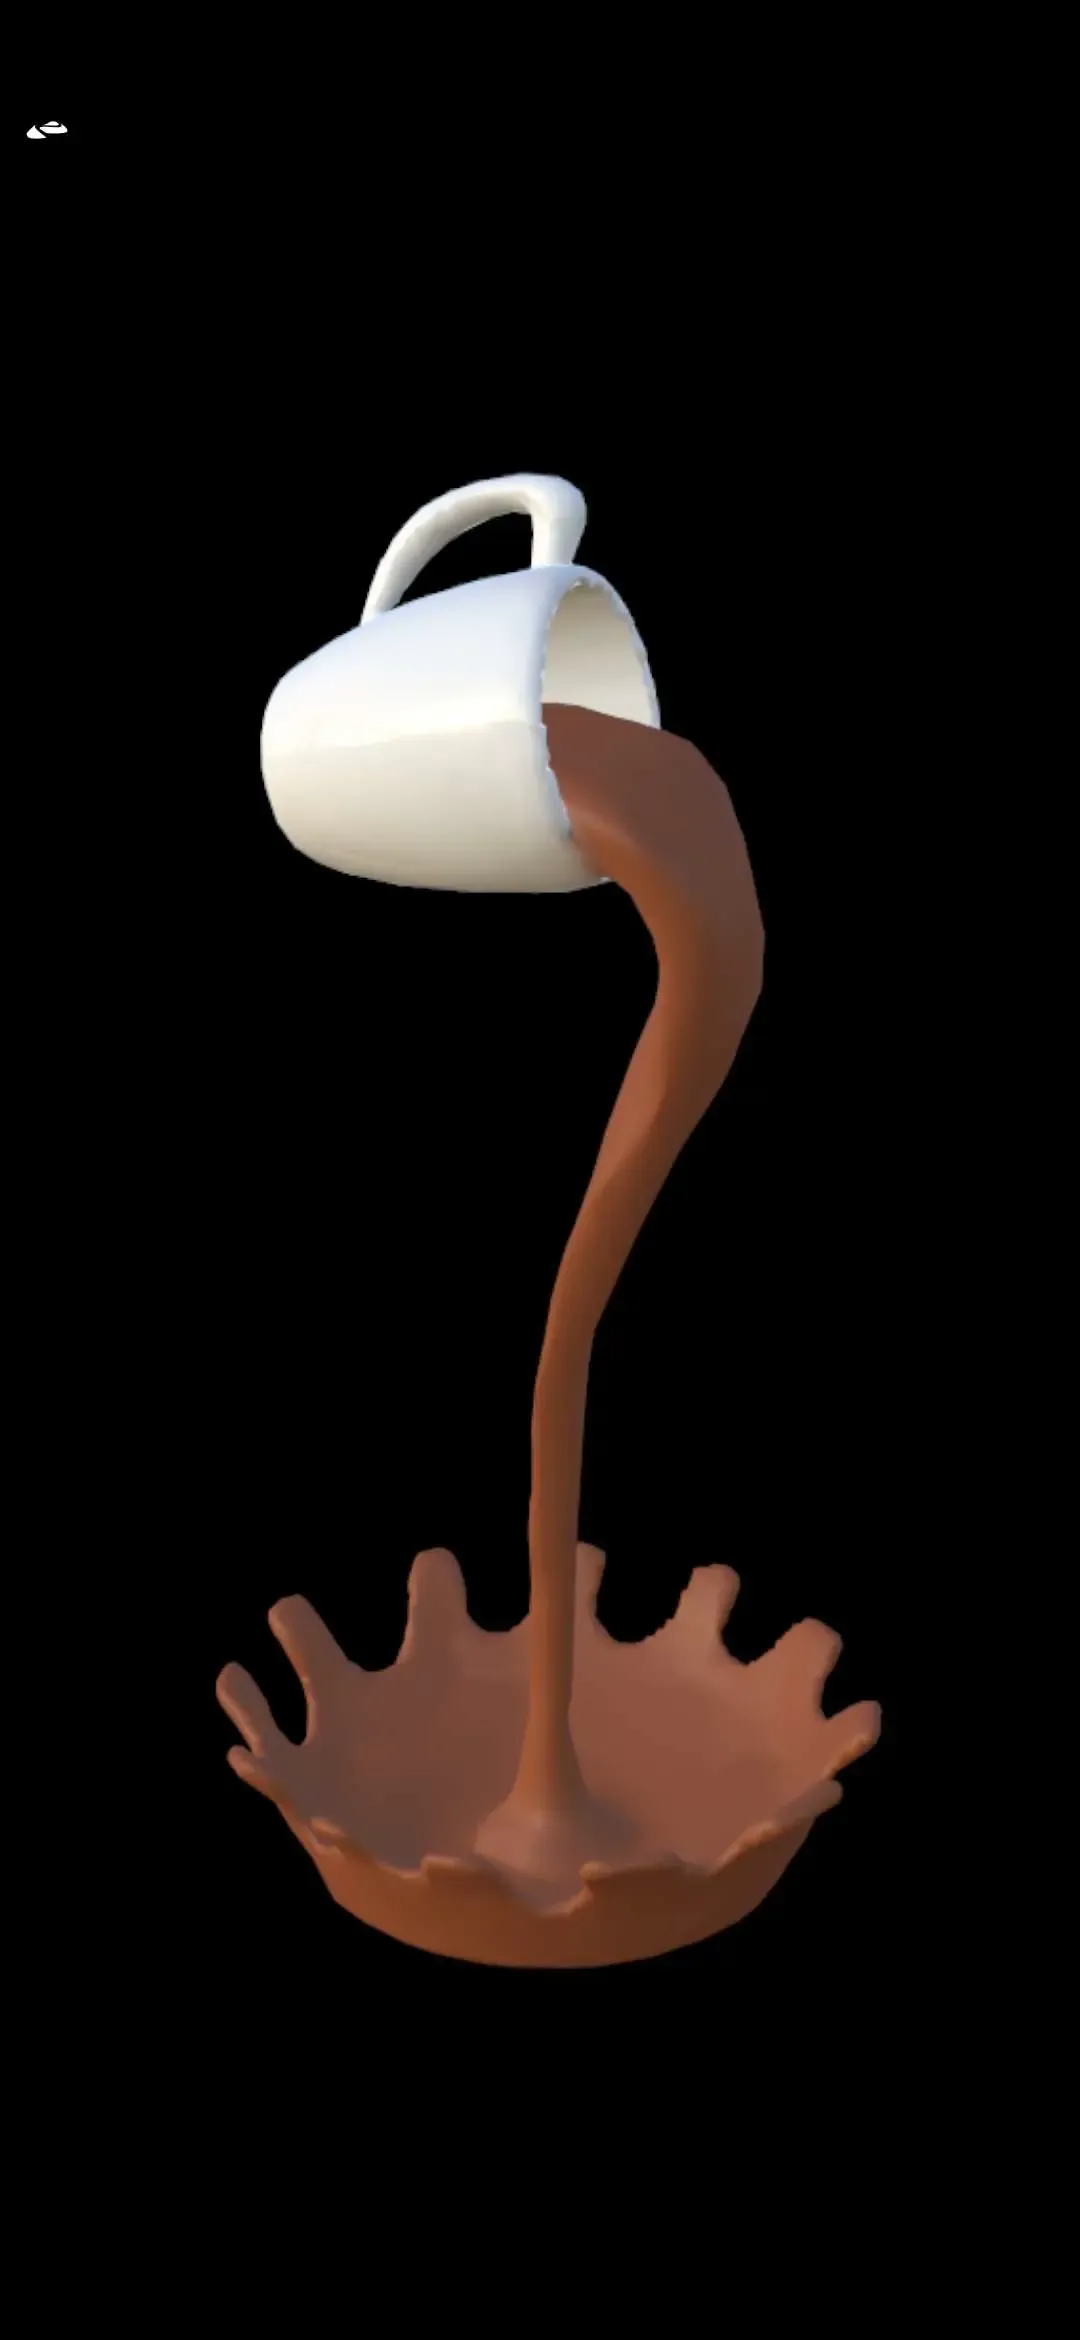 coffee spilling cup 